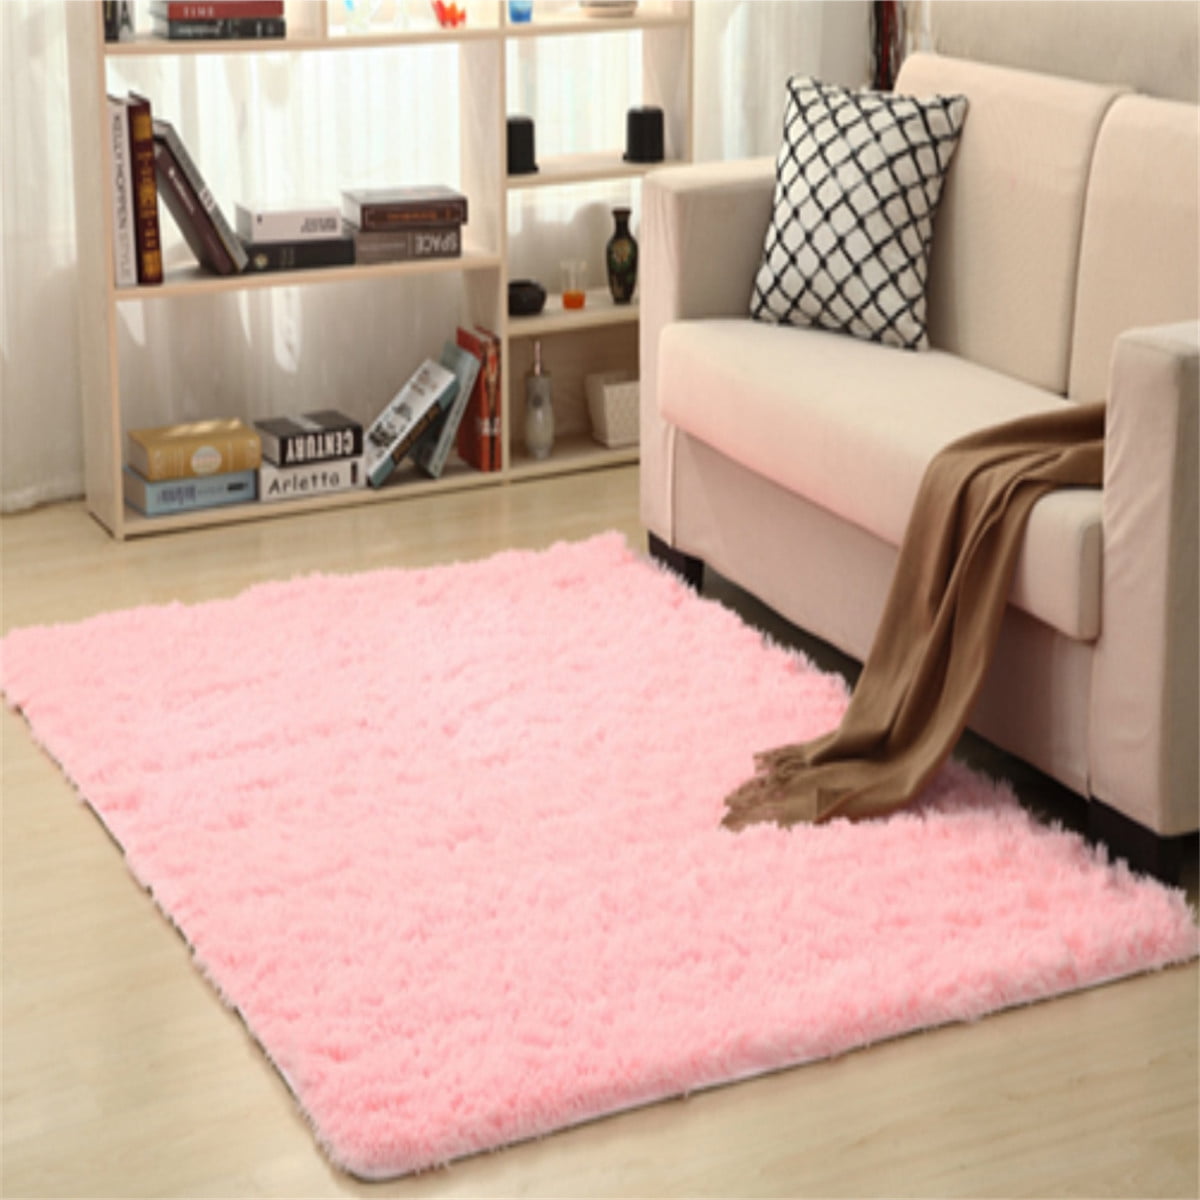 Soft Fluffy Bedroom Rugs - 4 Sizes Indoor Shaggy Plush Area Rug for